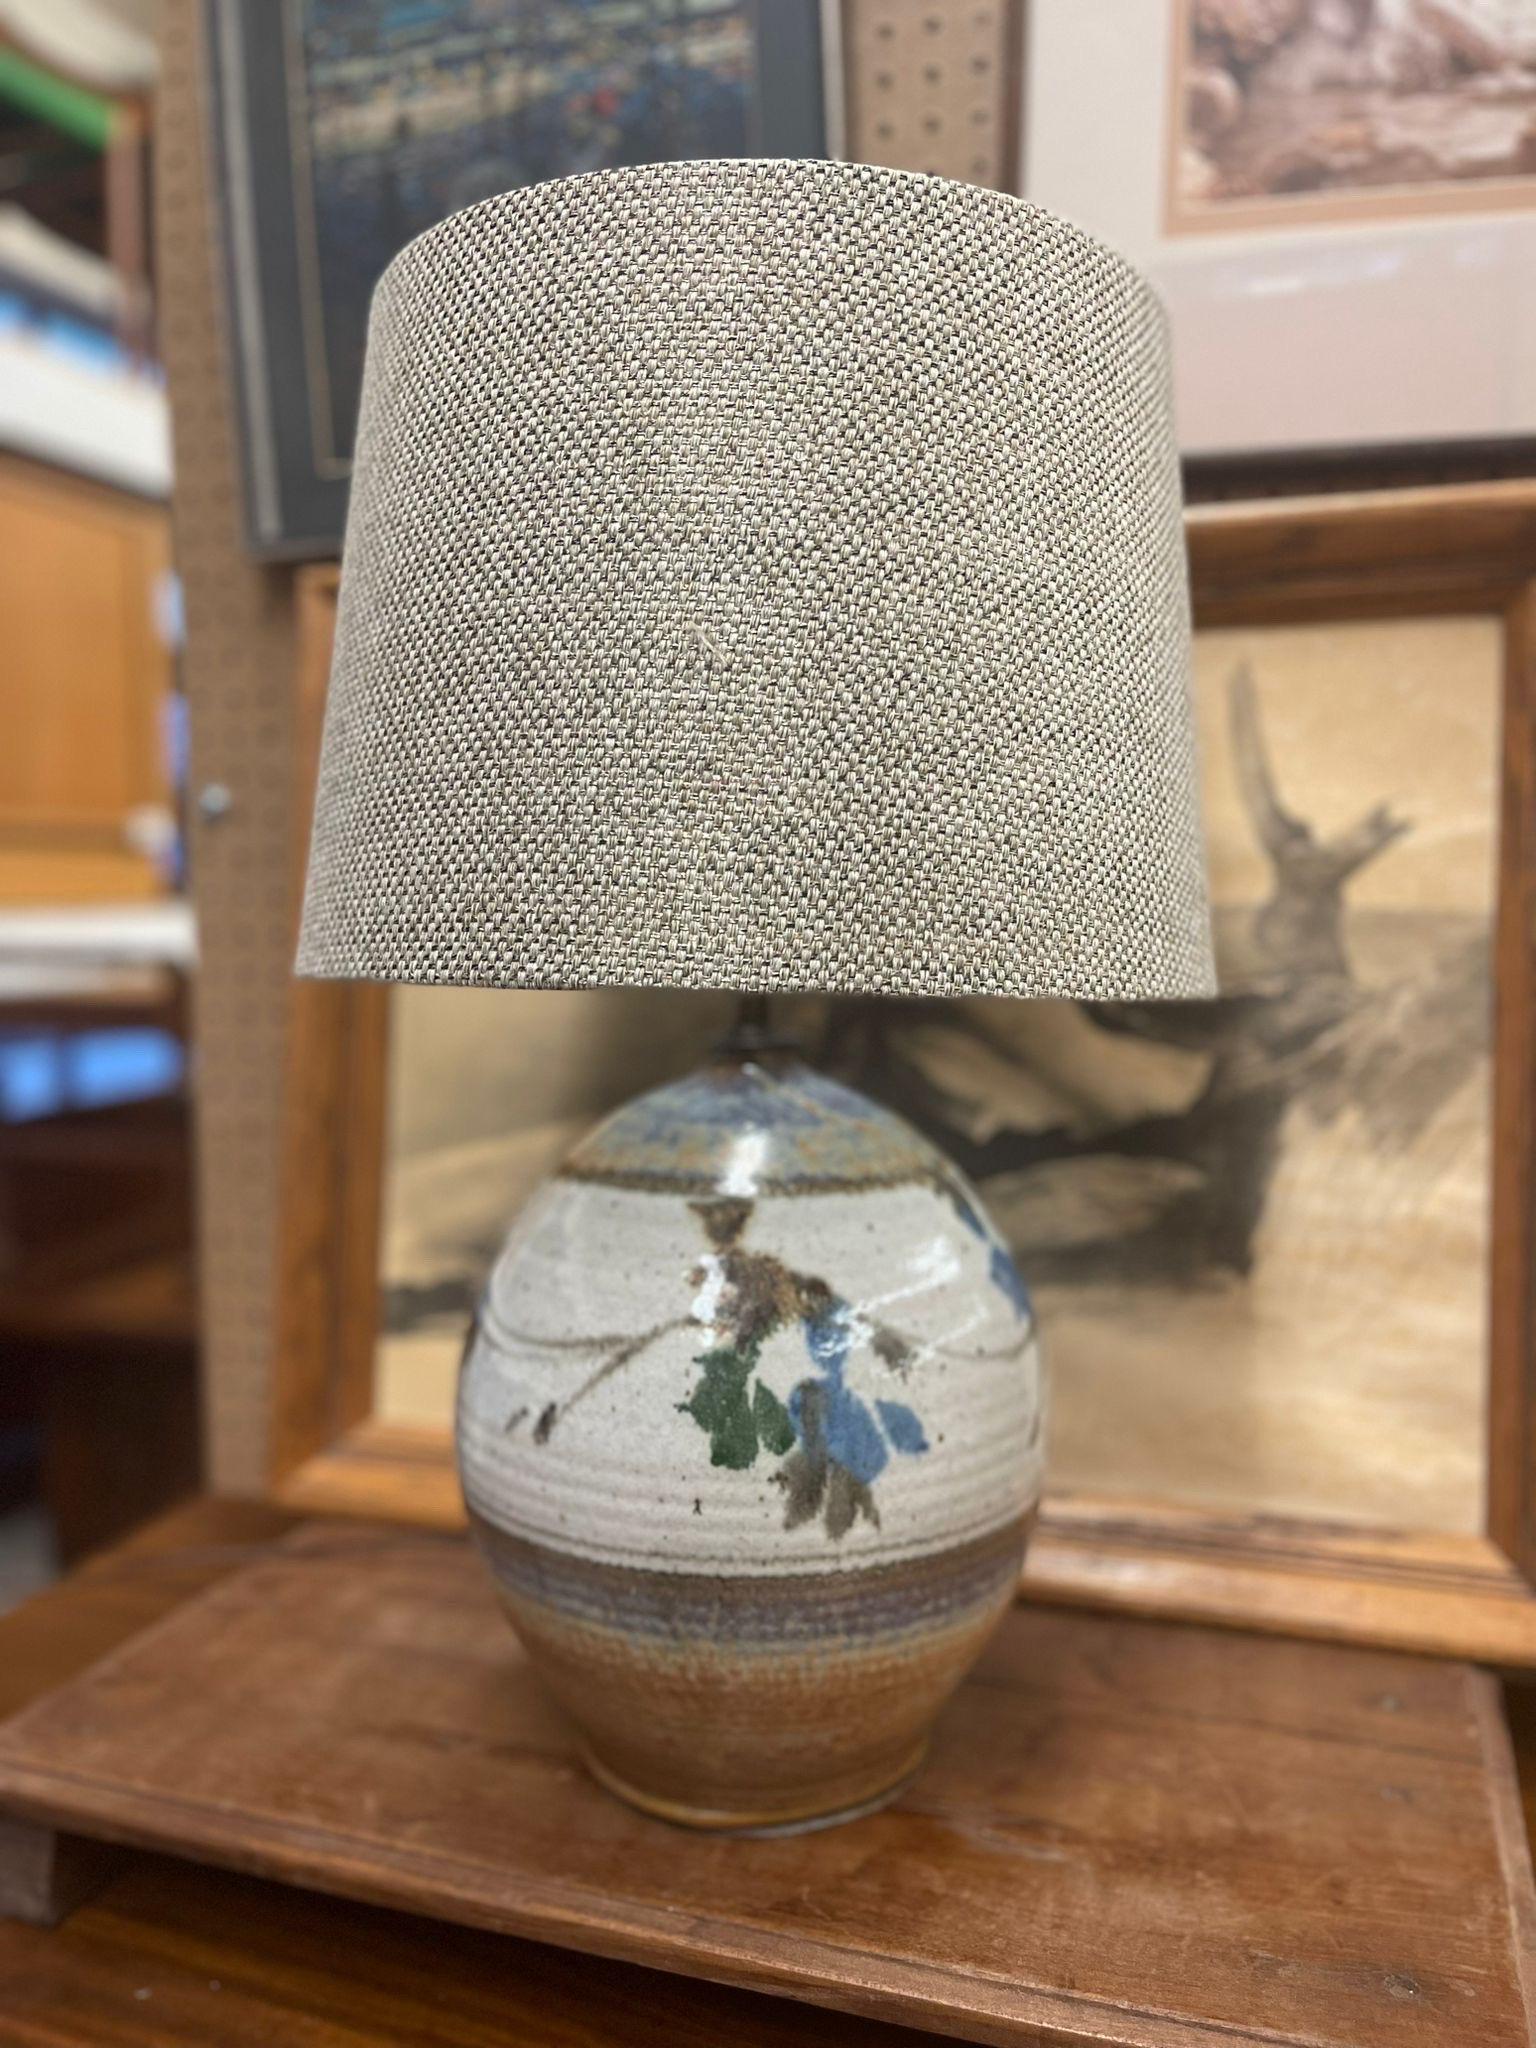 Large Vintage Lamp Circa 1970s. Abstract Floral Motif Around the Base. Fully Functional Electric Wiring. Mid Century Modern Style. Vintage Condition Consistent with Age as Pictured.

Dimensions. 13 Diameter ; 22 H